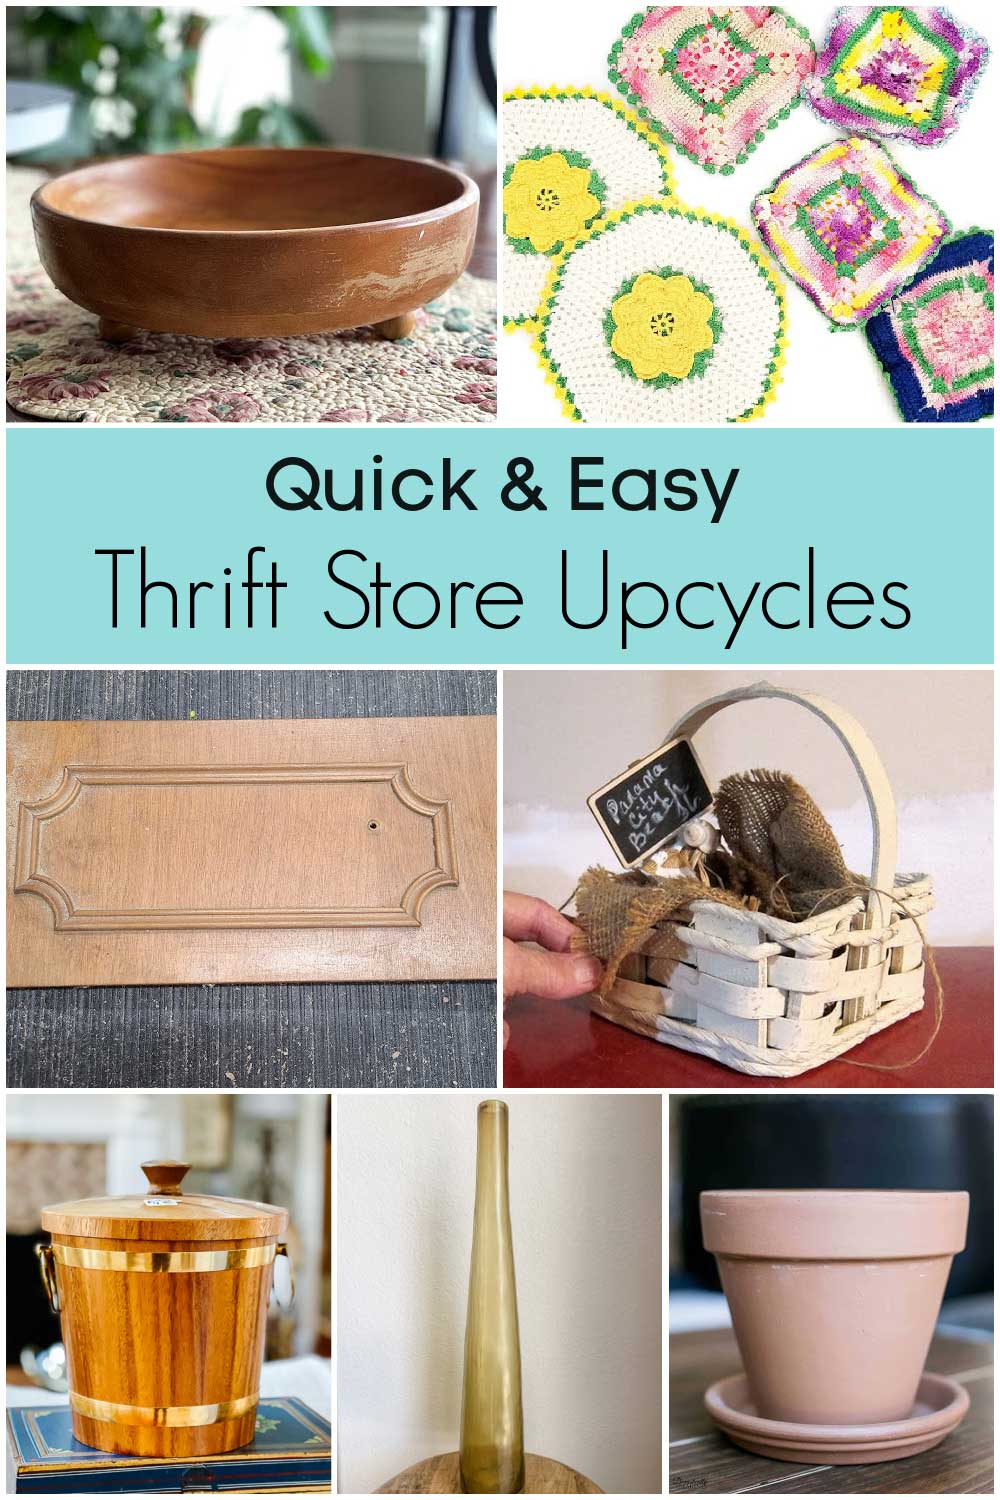 Items from the thrift store to upcycle for home decor